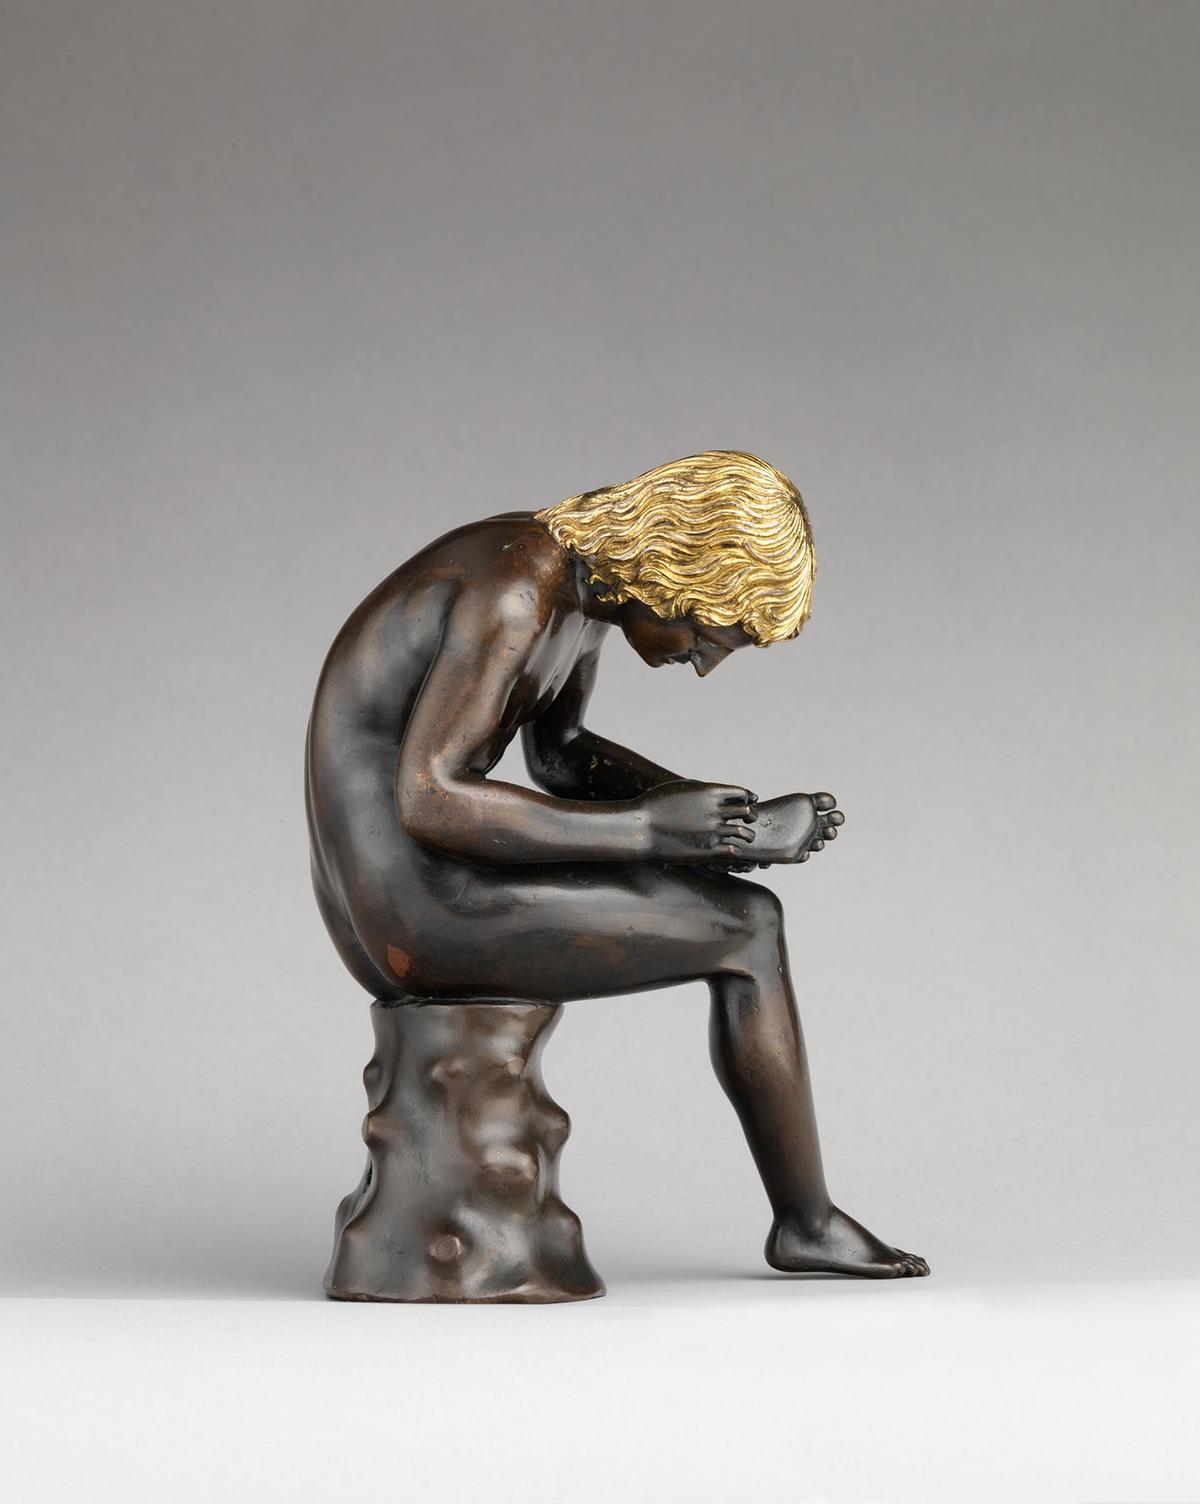 "Spinario" ("Boy Pulling a Thorn From His Foot"), circa 1501, by Antico. Bronze, partially gilt (hair) and silvered (eyes); 7 3/4 inches. The Metropolitan Museum of Art, New York City. (Public Domain)